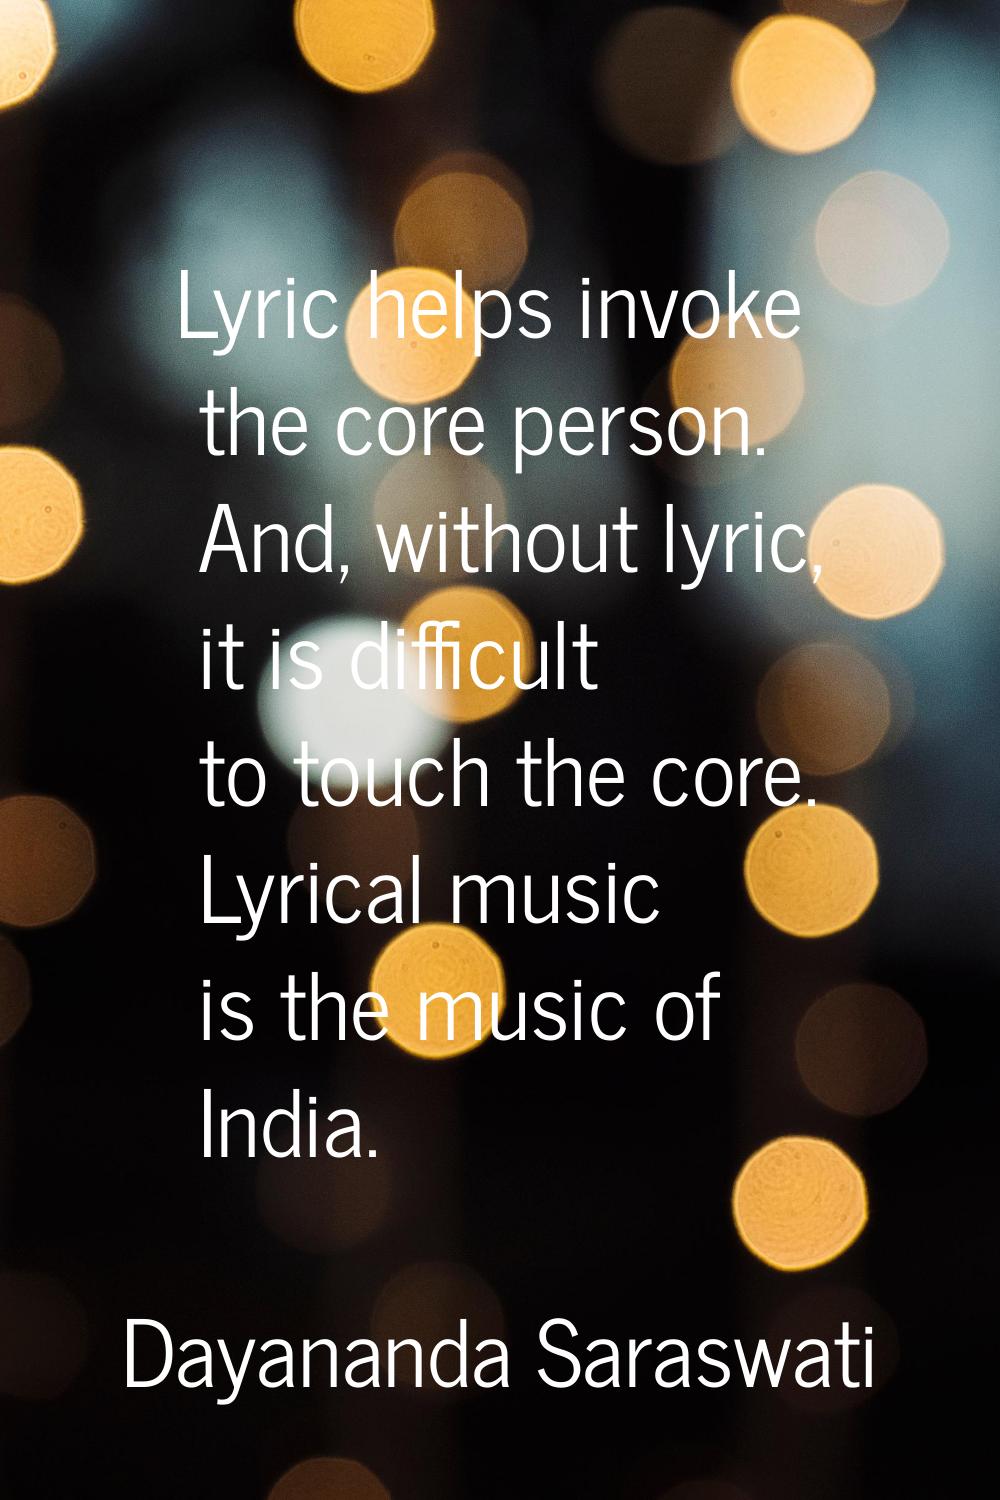 Lyric helps invoke the core person. And, without lyric, it is difficult to touch the core. Lyrical 